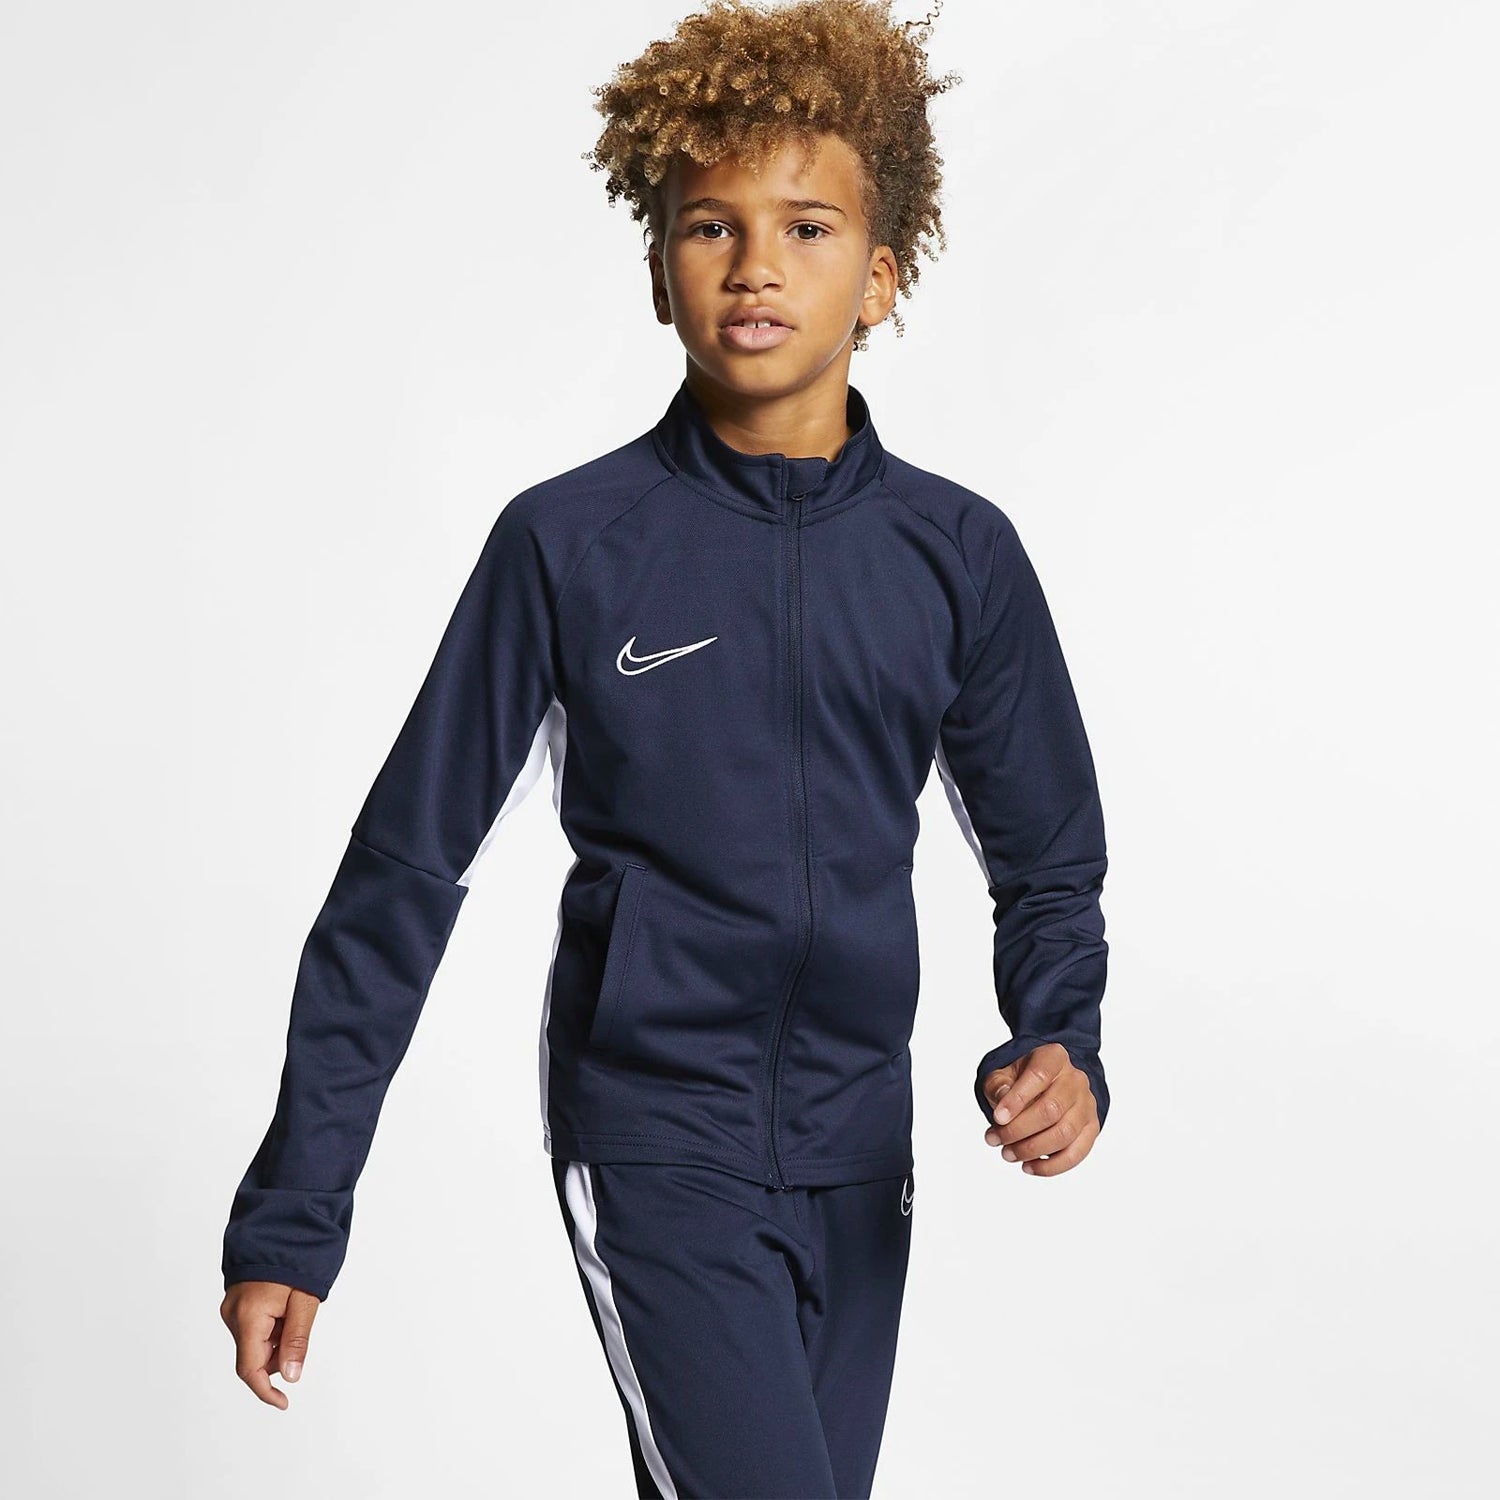 sí mismo cable Vibrar Youth Dry Academy Track Suit